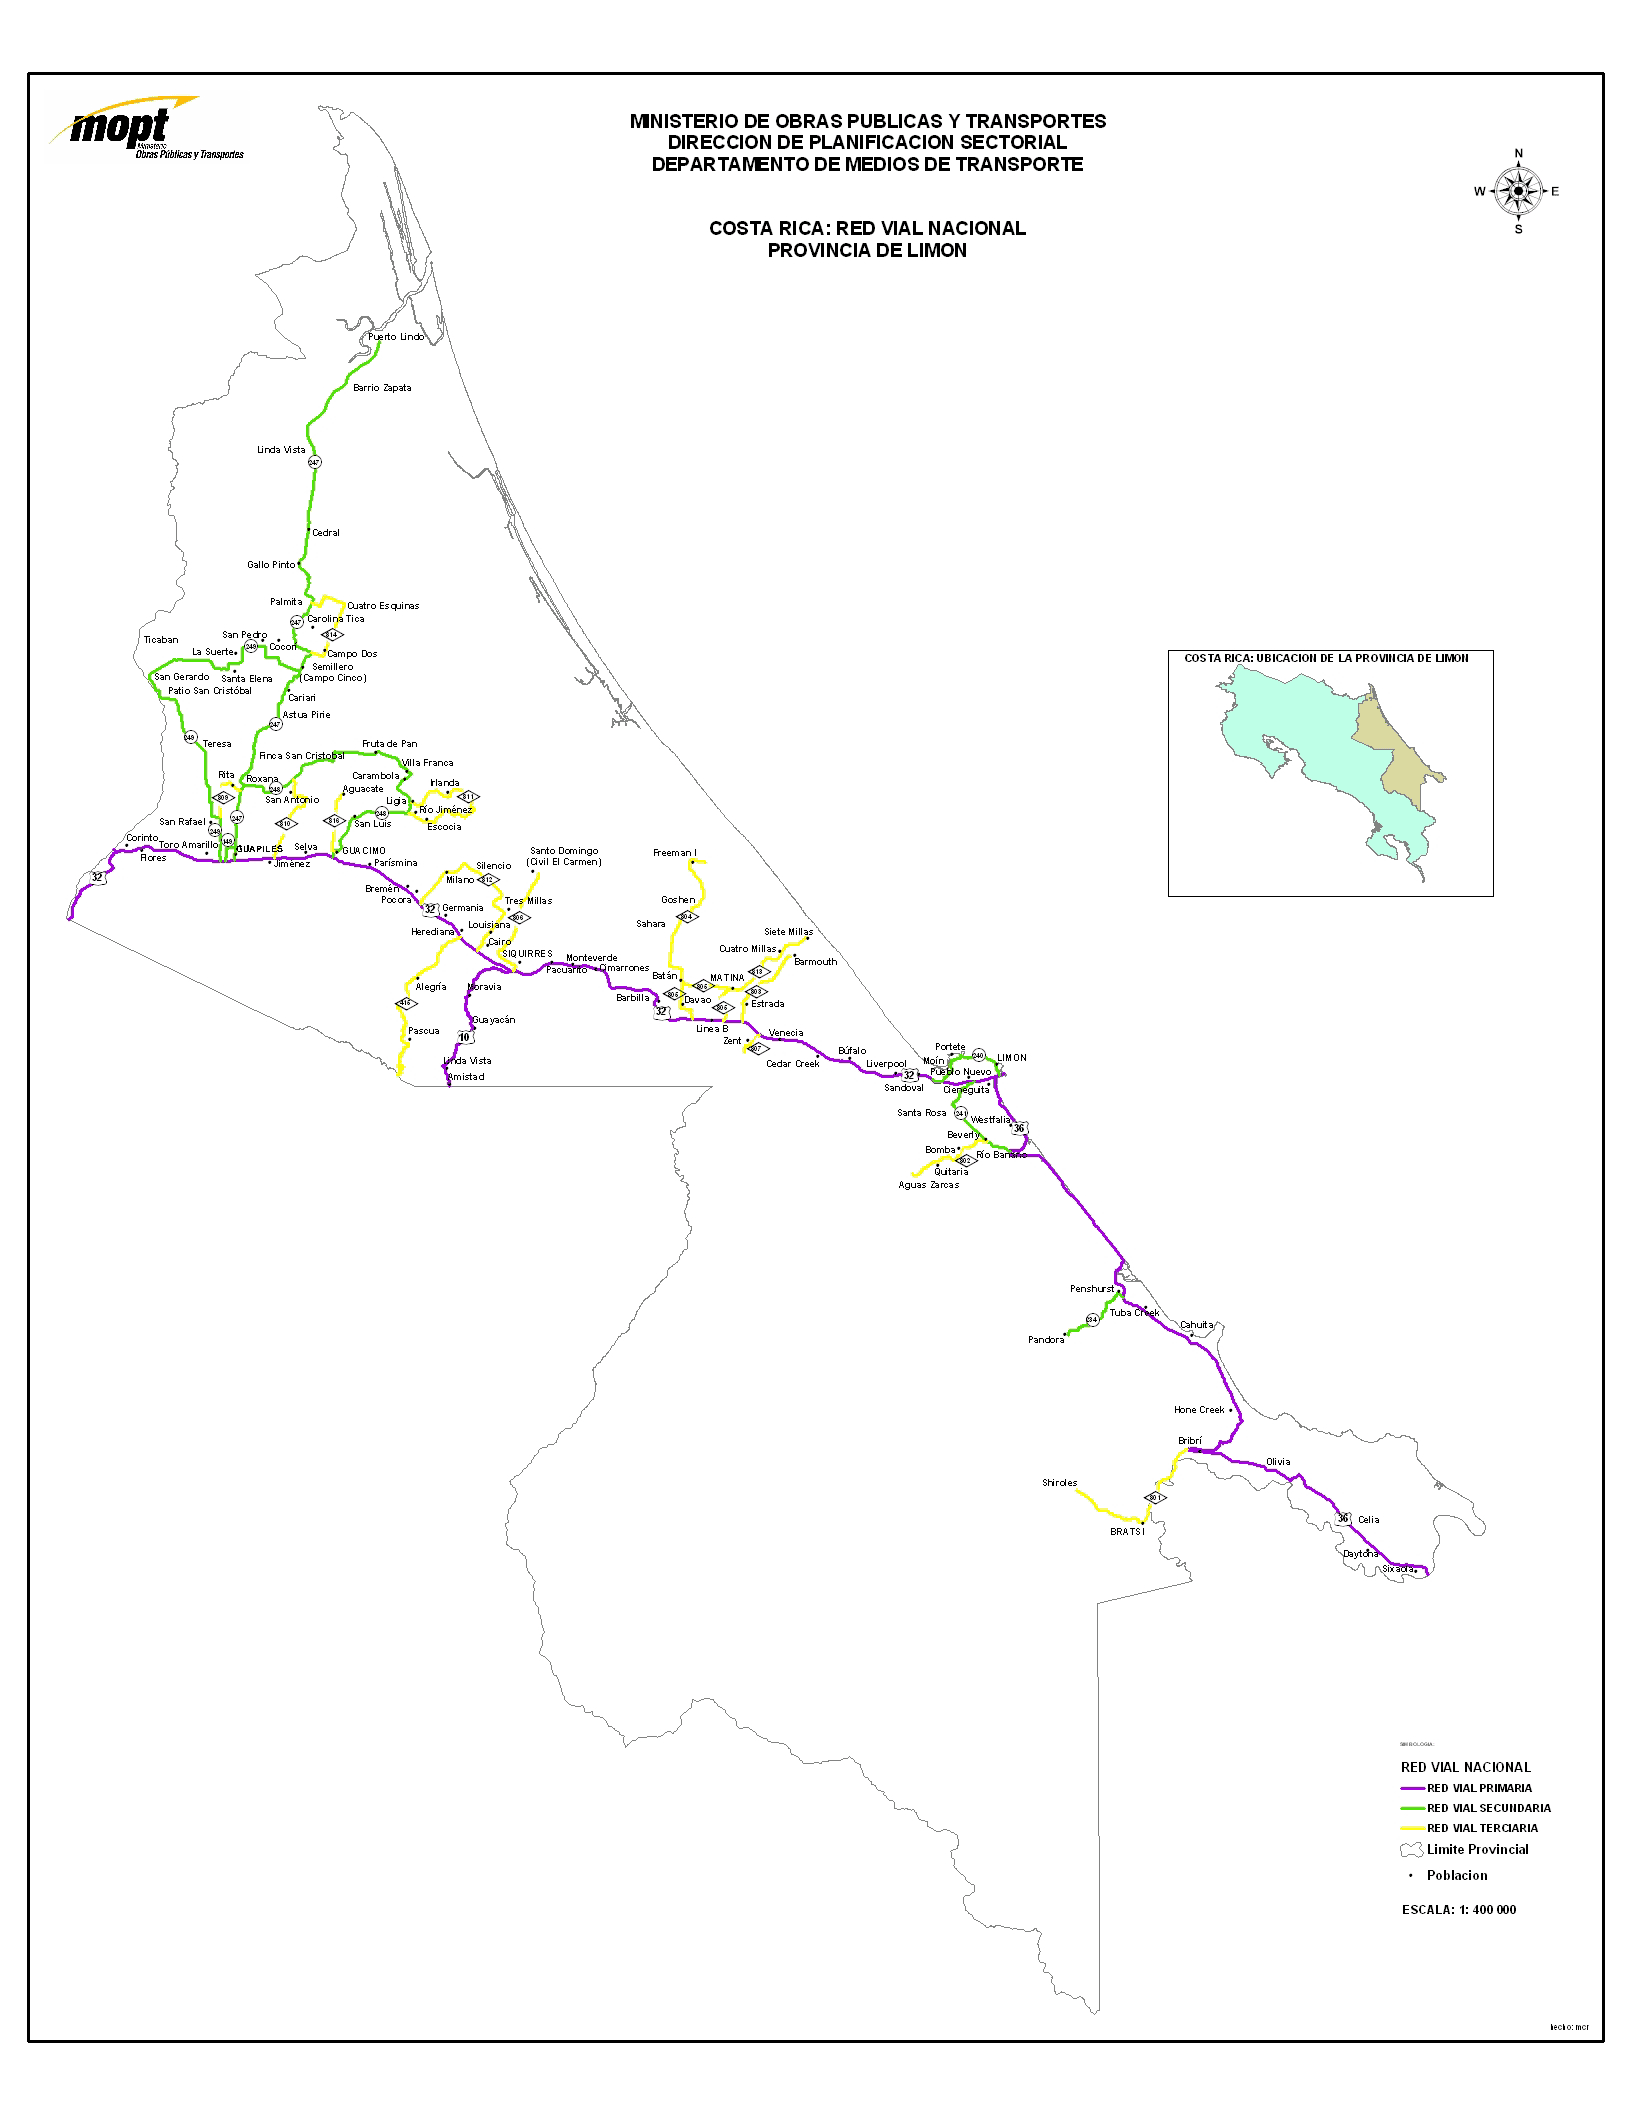 Limón Province Road Network Map, Costa Rica